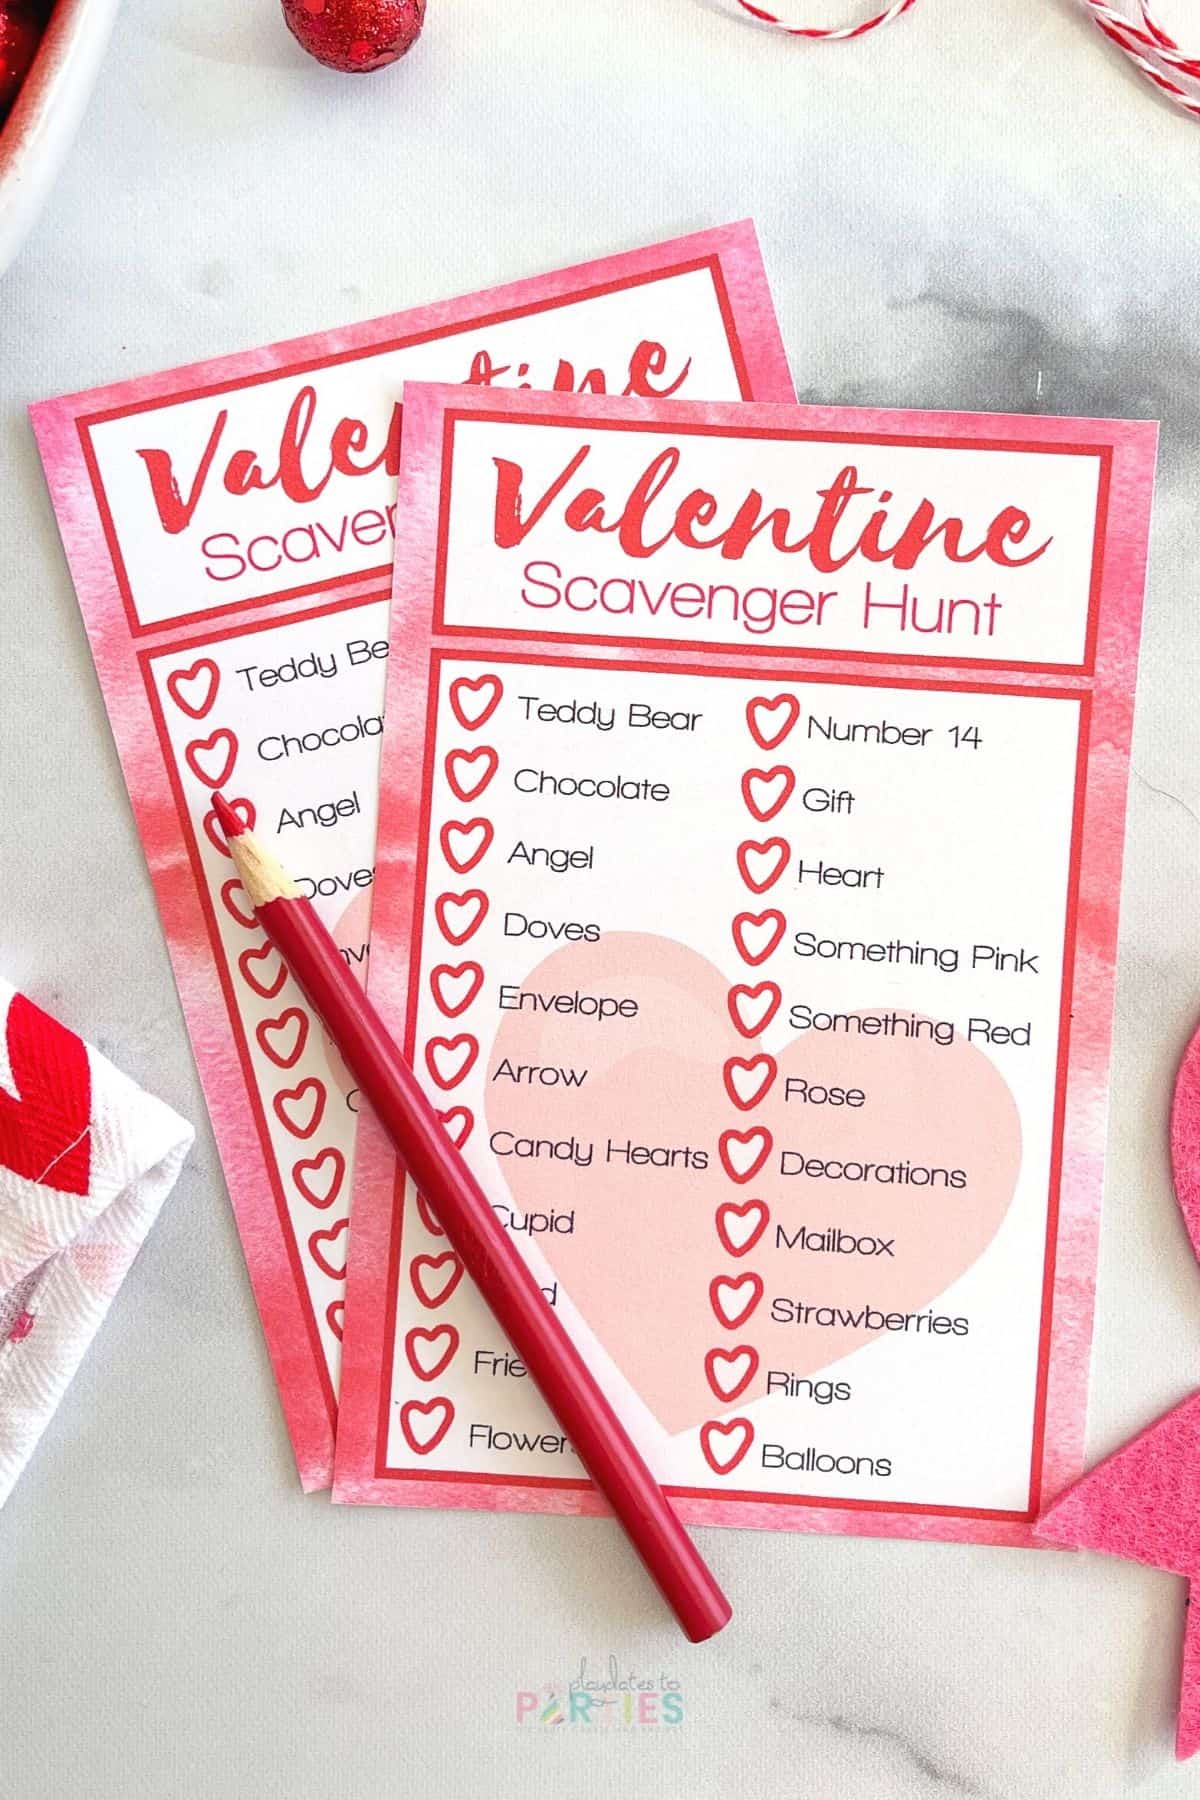 Two Valentine's Day themed scavenger hunt cards with lists of items.